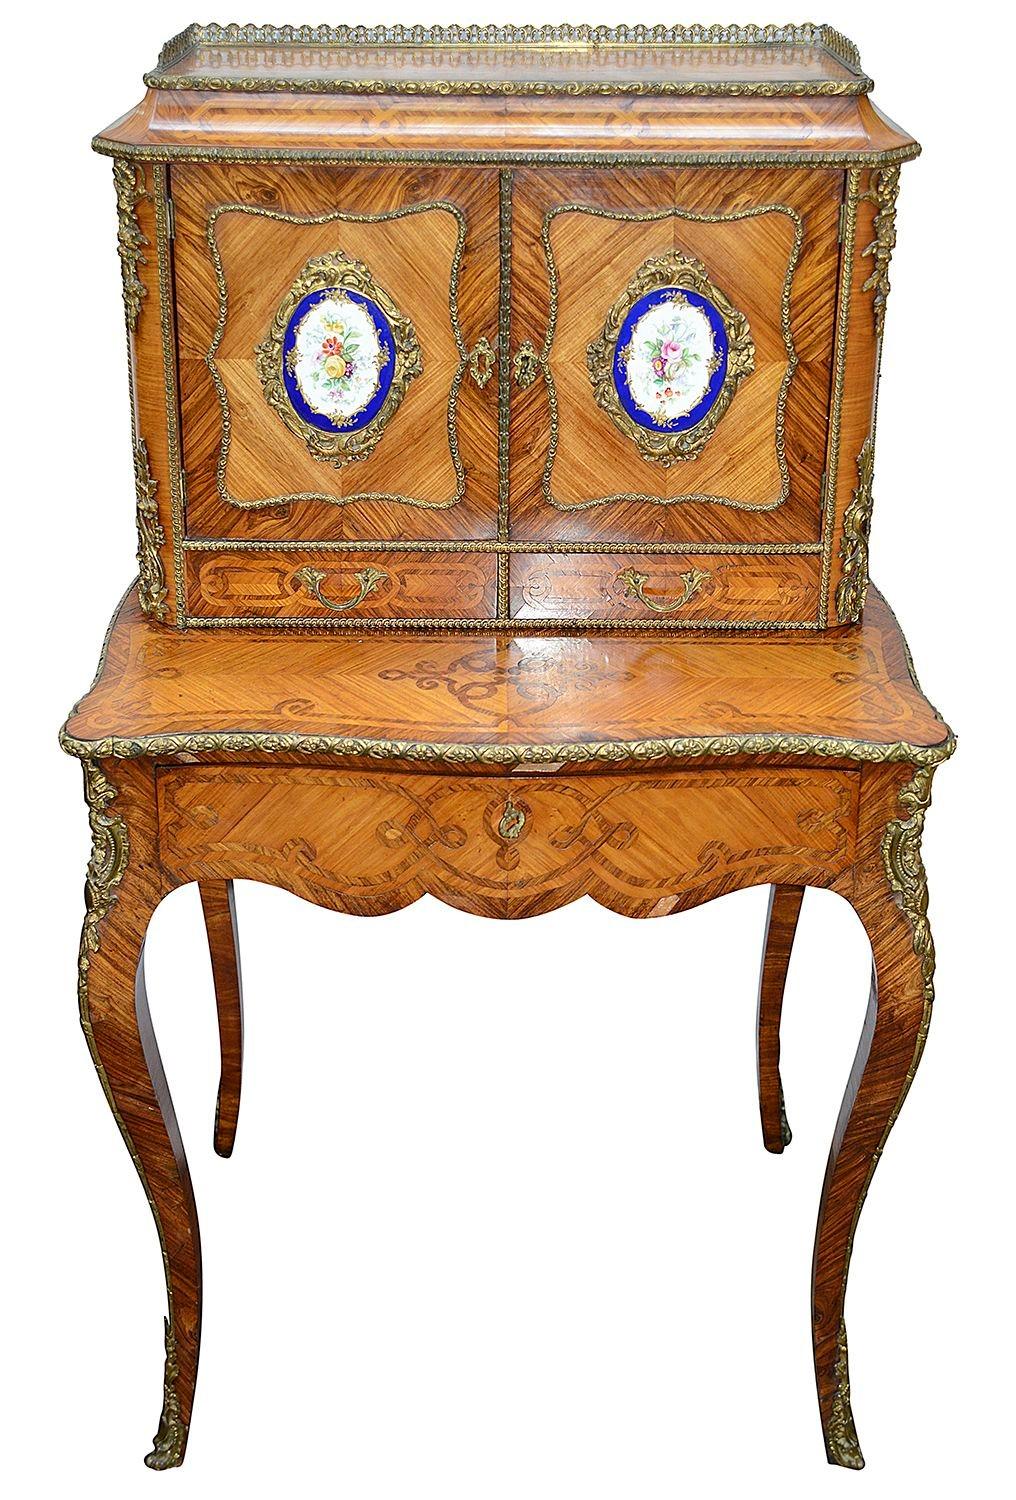 A very good quality late 19th Century French Louis XVI style Kingwood Bonheur du Jour, having inset Sevres porcelain style plaques depicting flowers, quartered veneers to the doors and sides, gilded ormolu mouldings and mounts.Raised on elegant